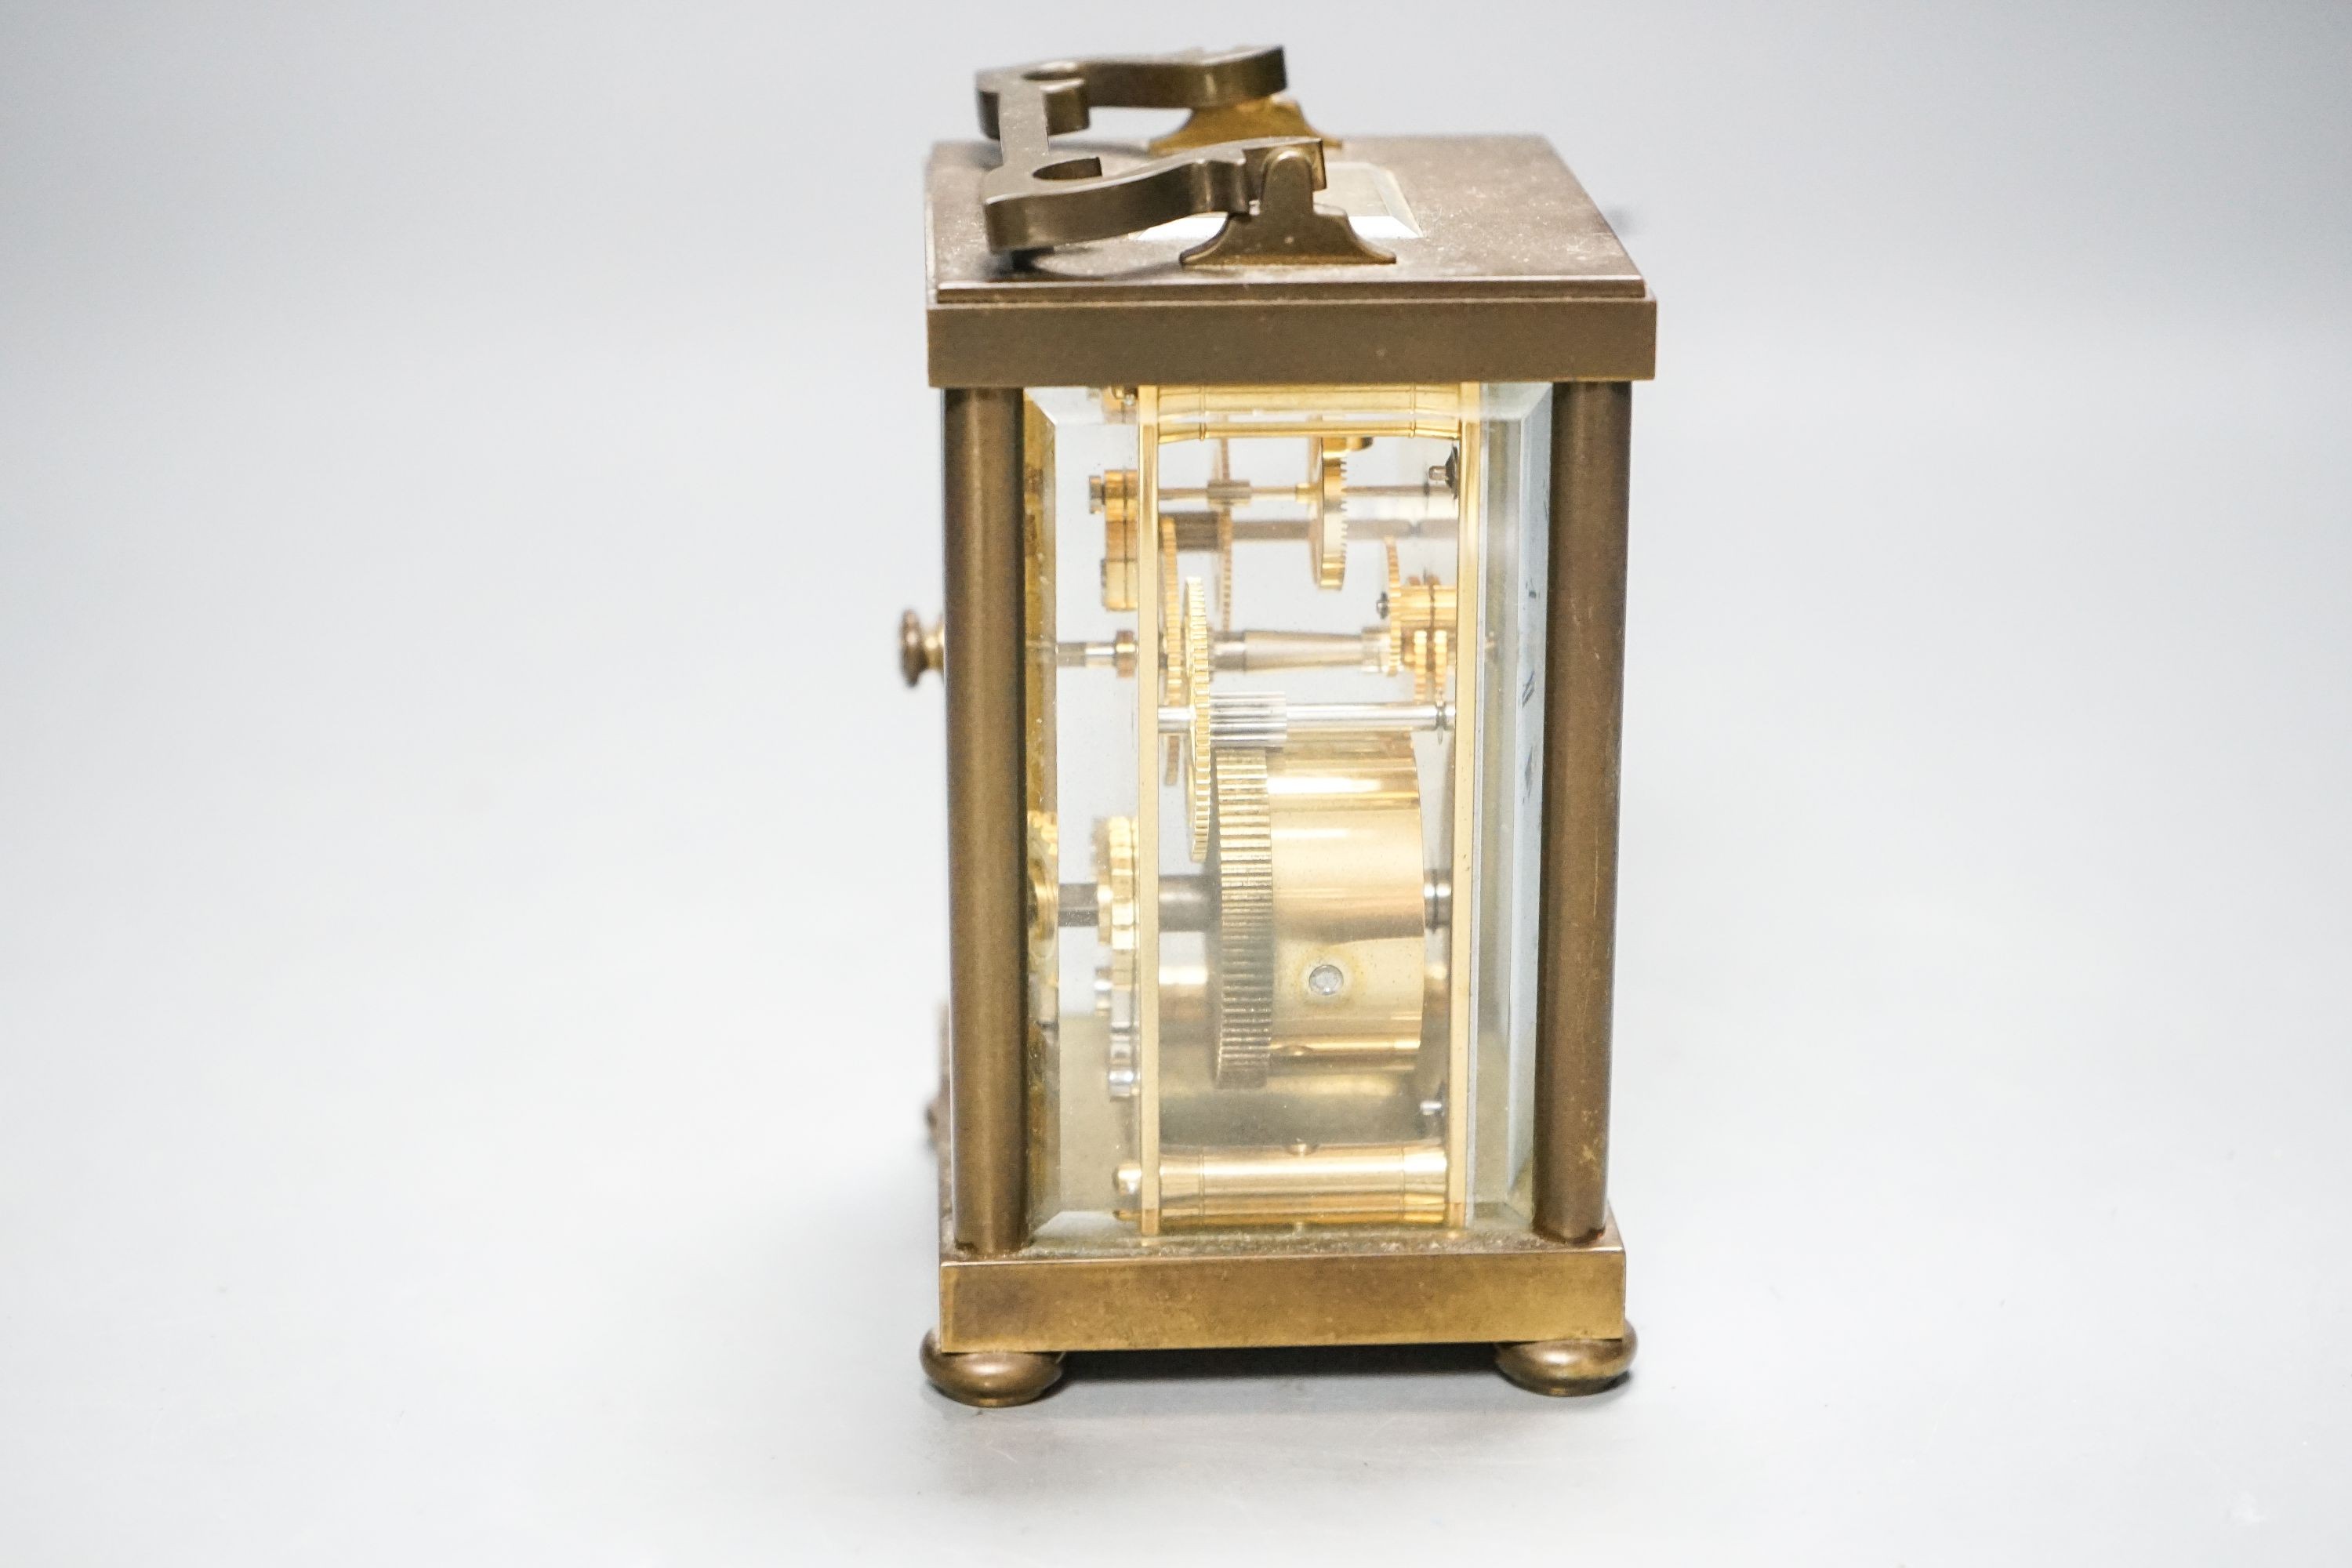 A Matthew Norman brass carriage timepiece, 15 cm high with the handle up